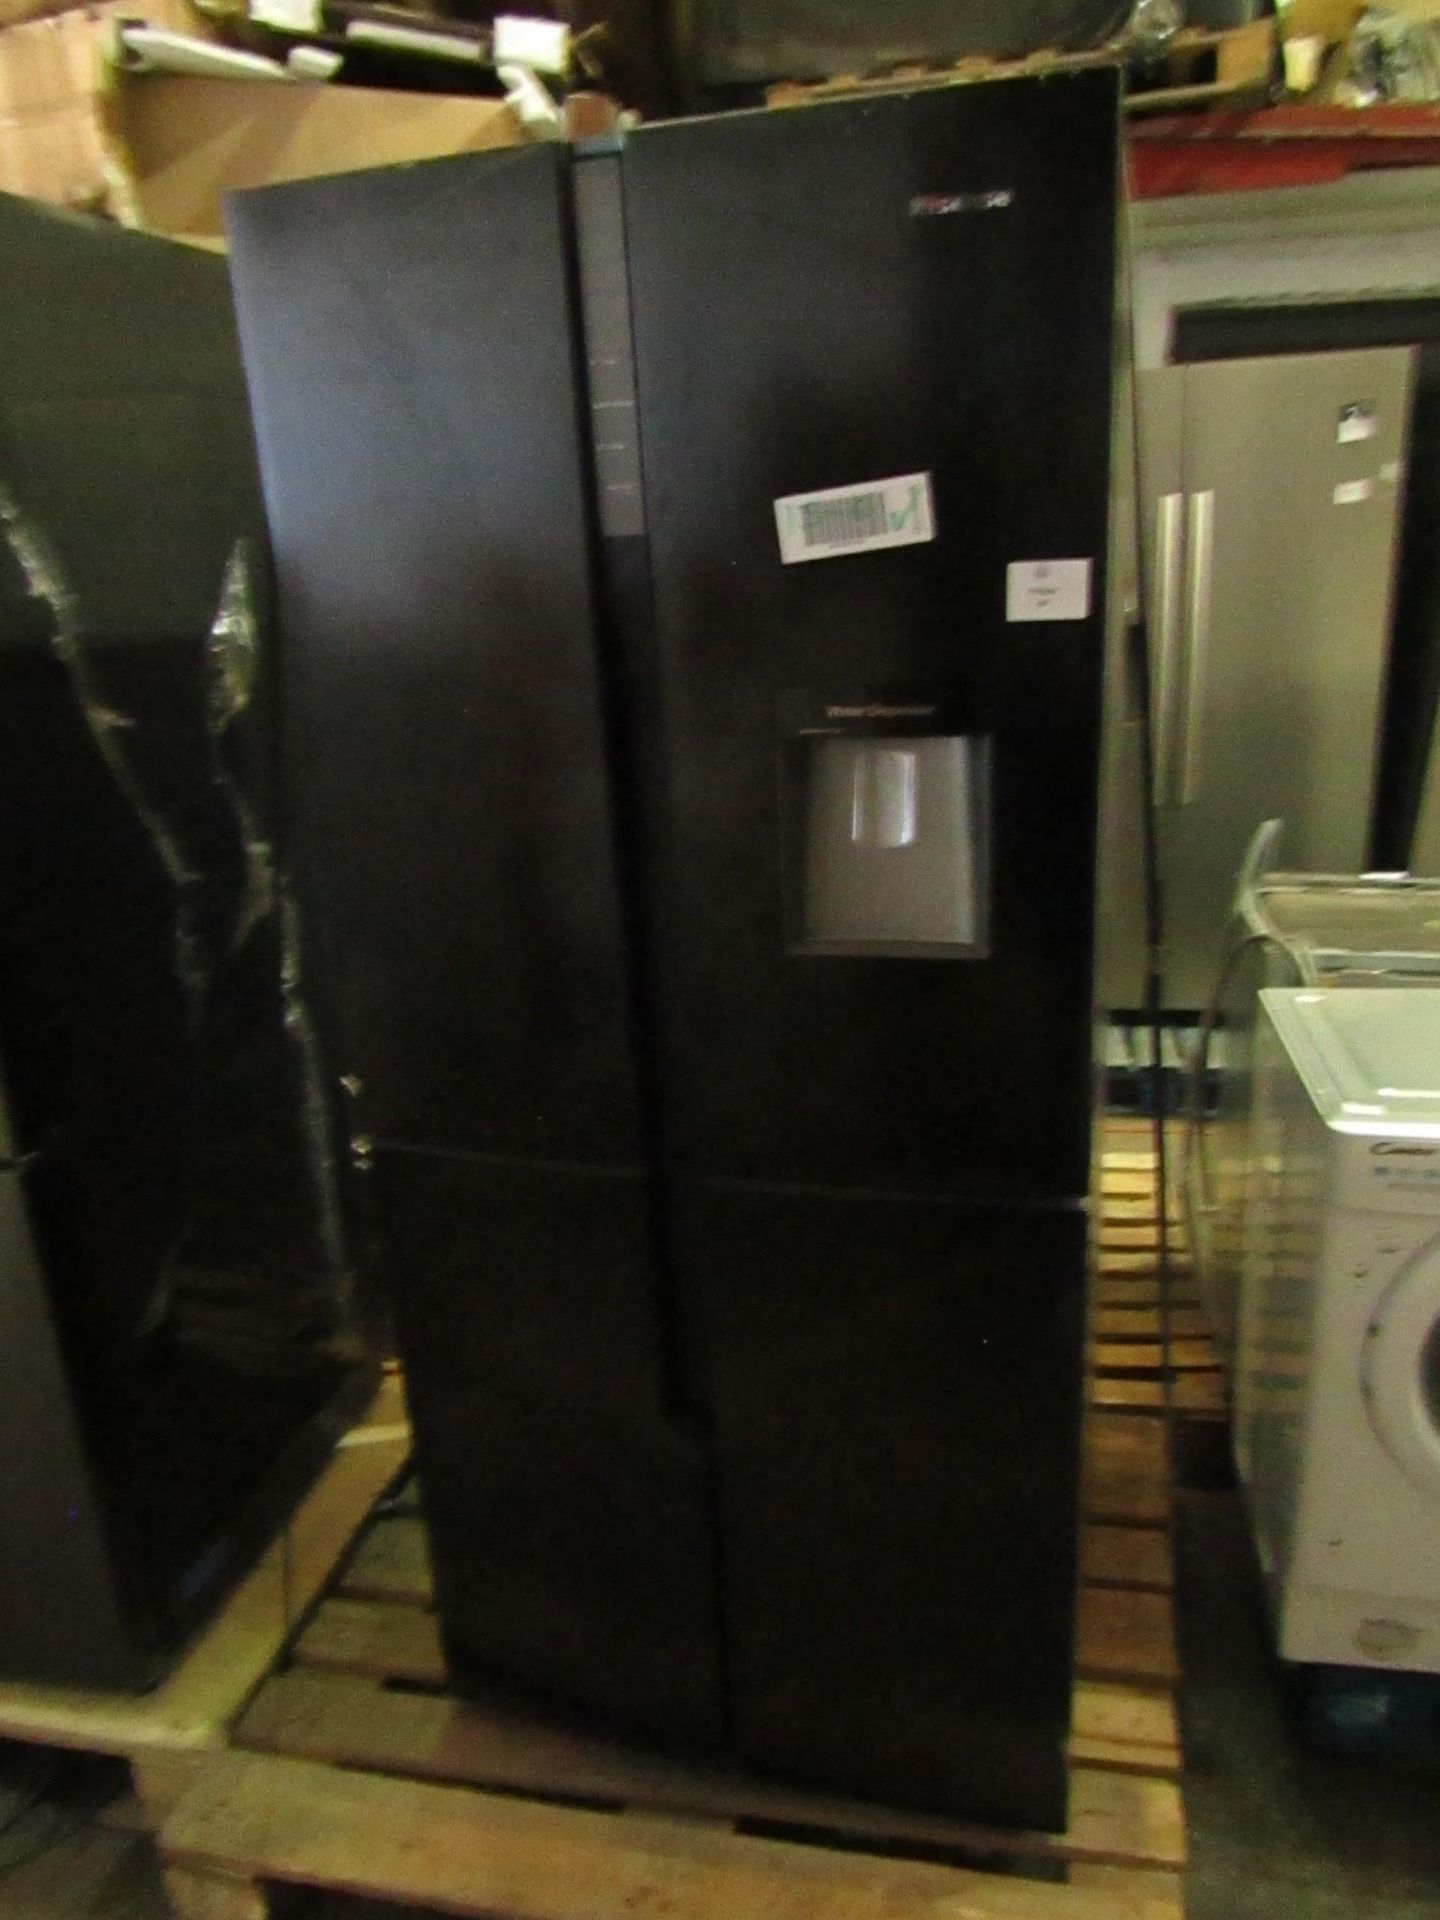 HISENSE American Fridge Freezer Black RQ560N4WBI RRP ??600.00 - The items in this lot are thought to